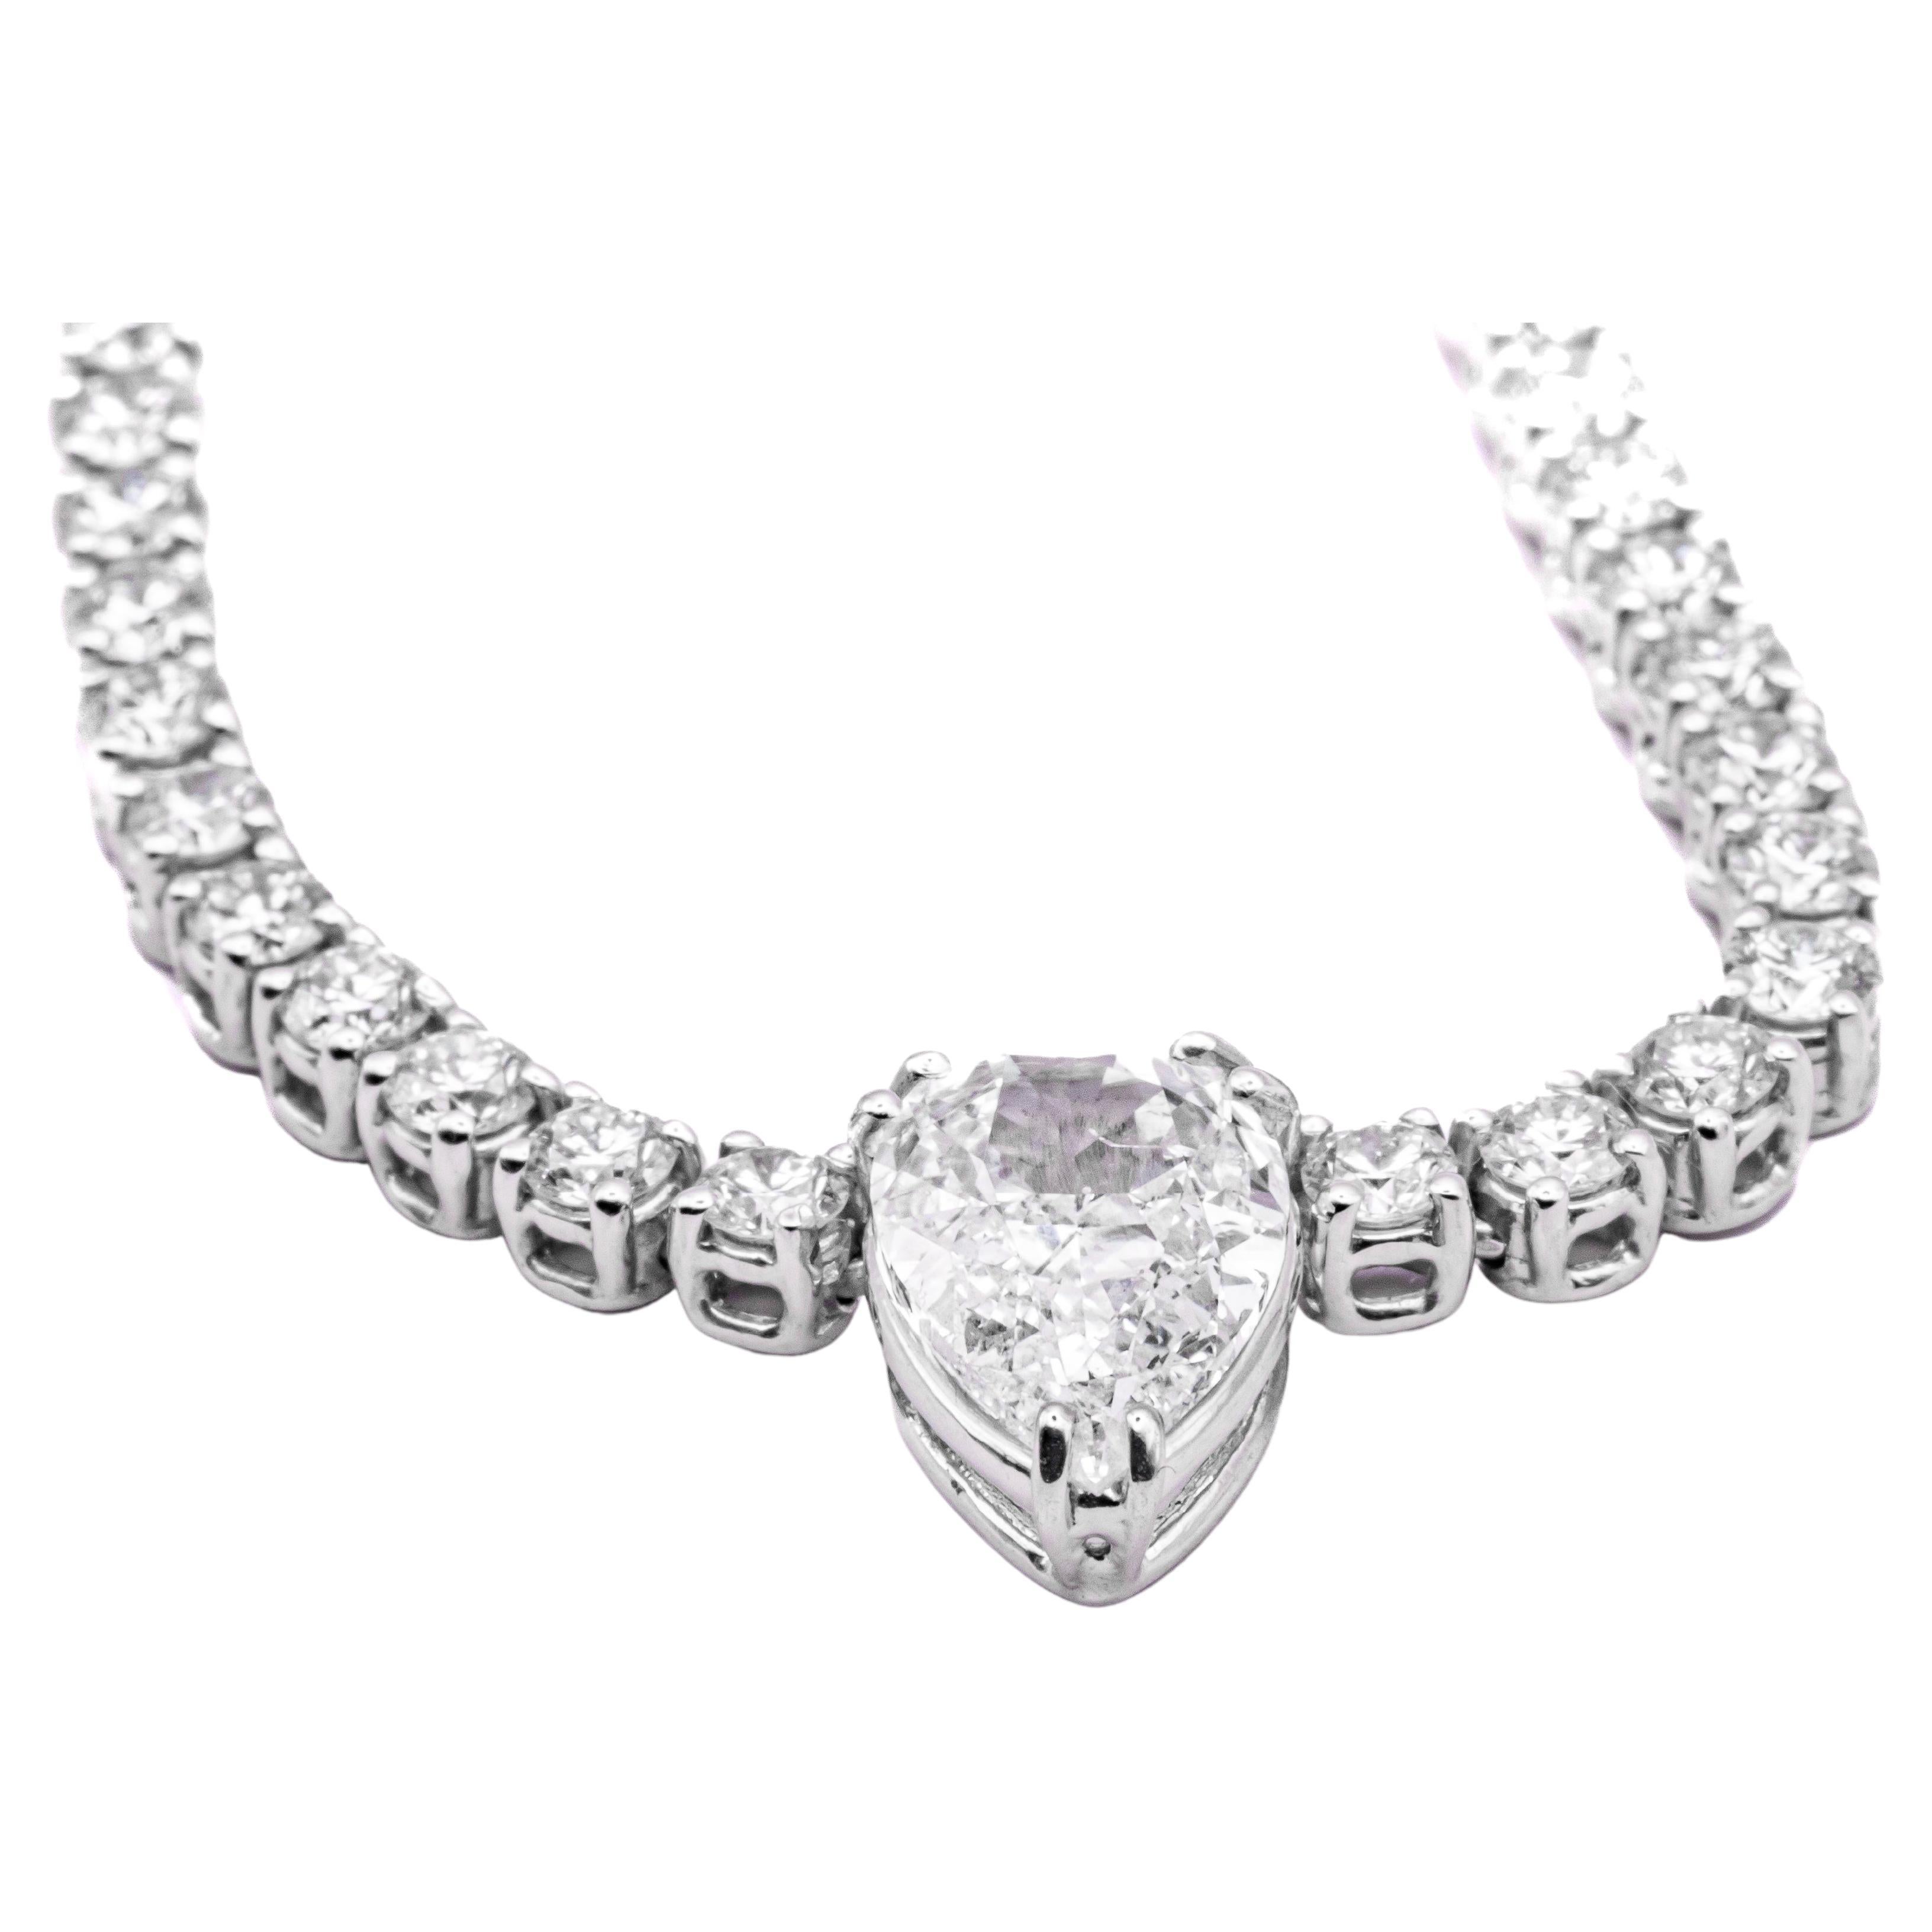 8.91 Carat VS G White Gold Tennis Necklace with Central  Diamond Carat 1, 71